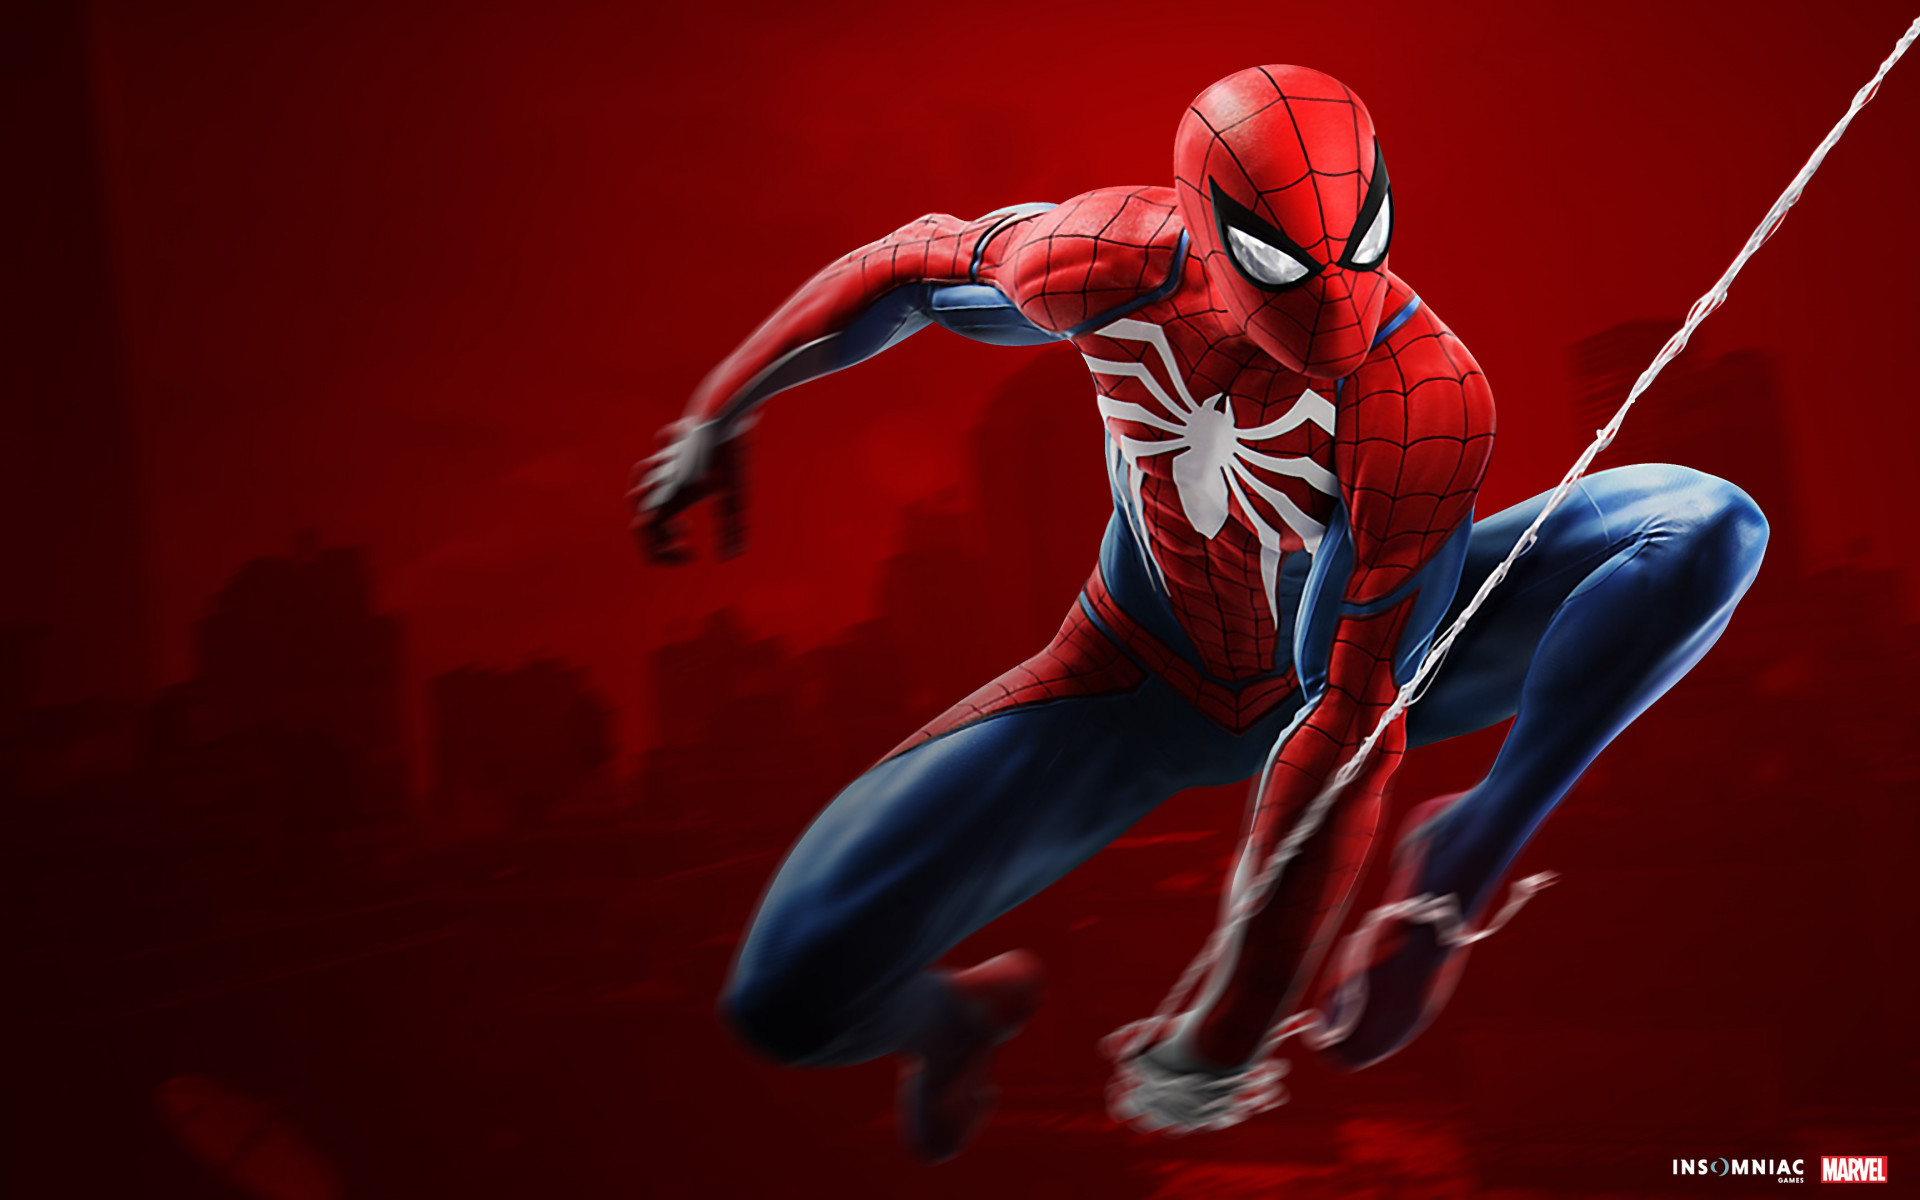 Spider Man game on PS4 wallpaper 1920x1200